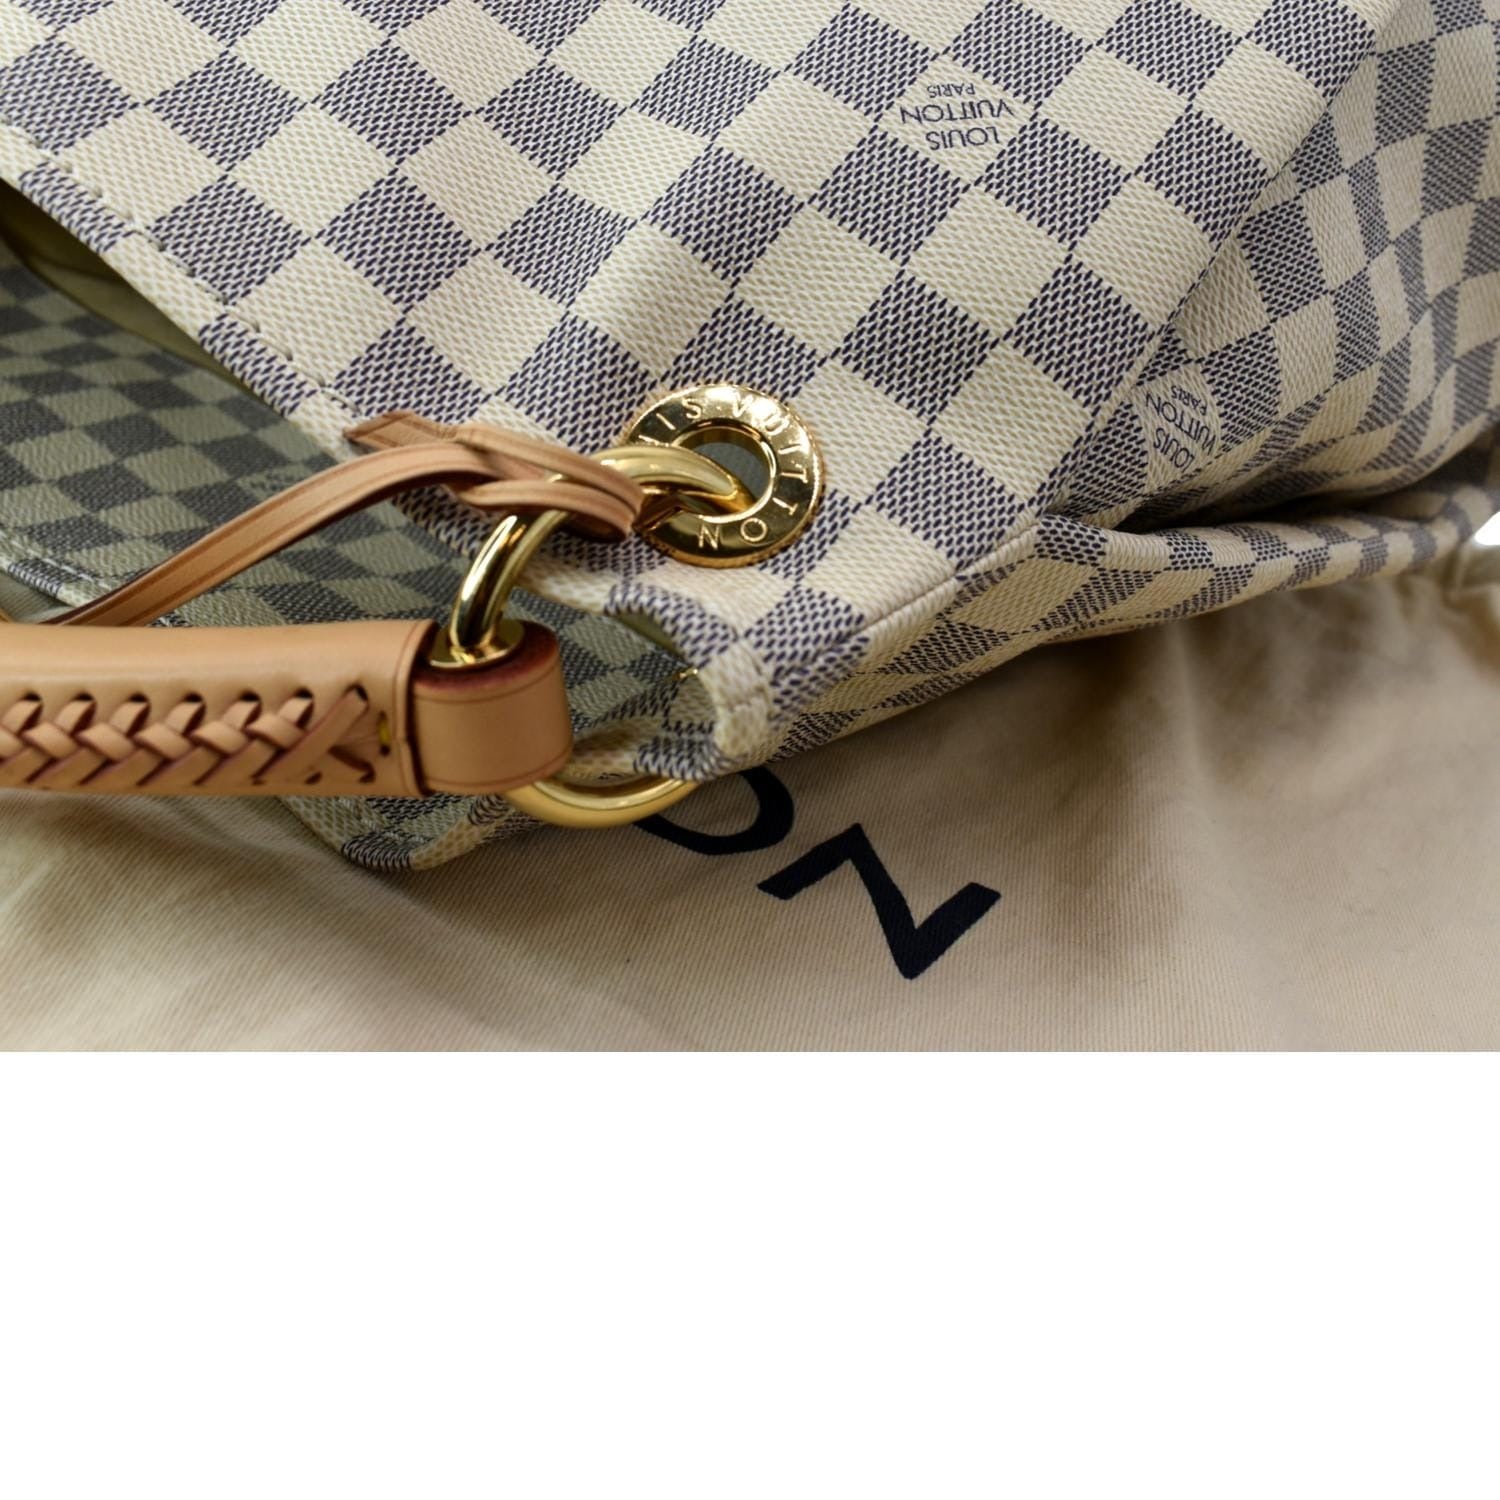 New Authentic Louis Vuitton Neverfull MM Damier Azur Beige With Microchip